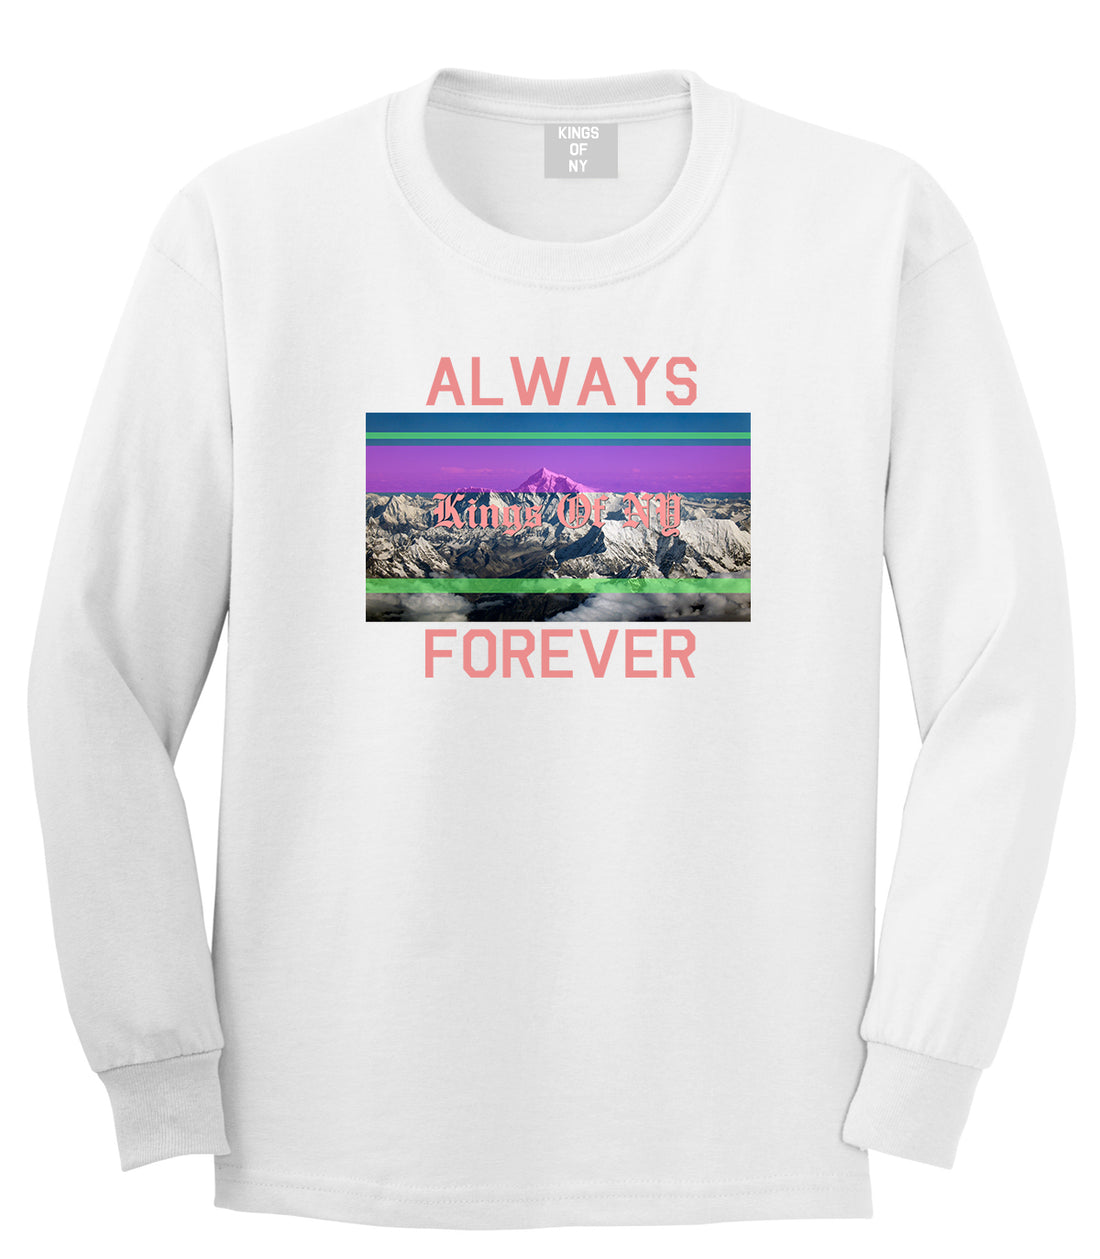 Mountains Always And Forever Mens Long Sleeve T-Shirt White by Kings Of NY